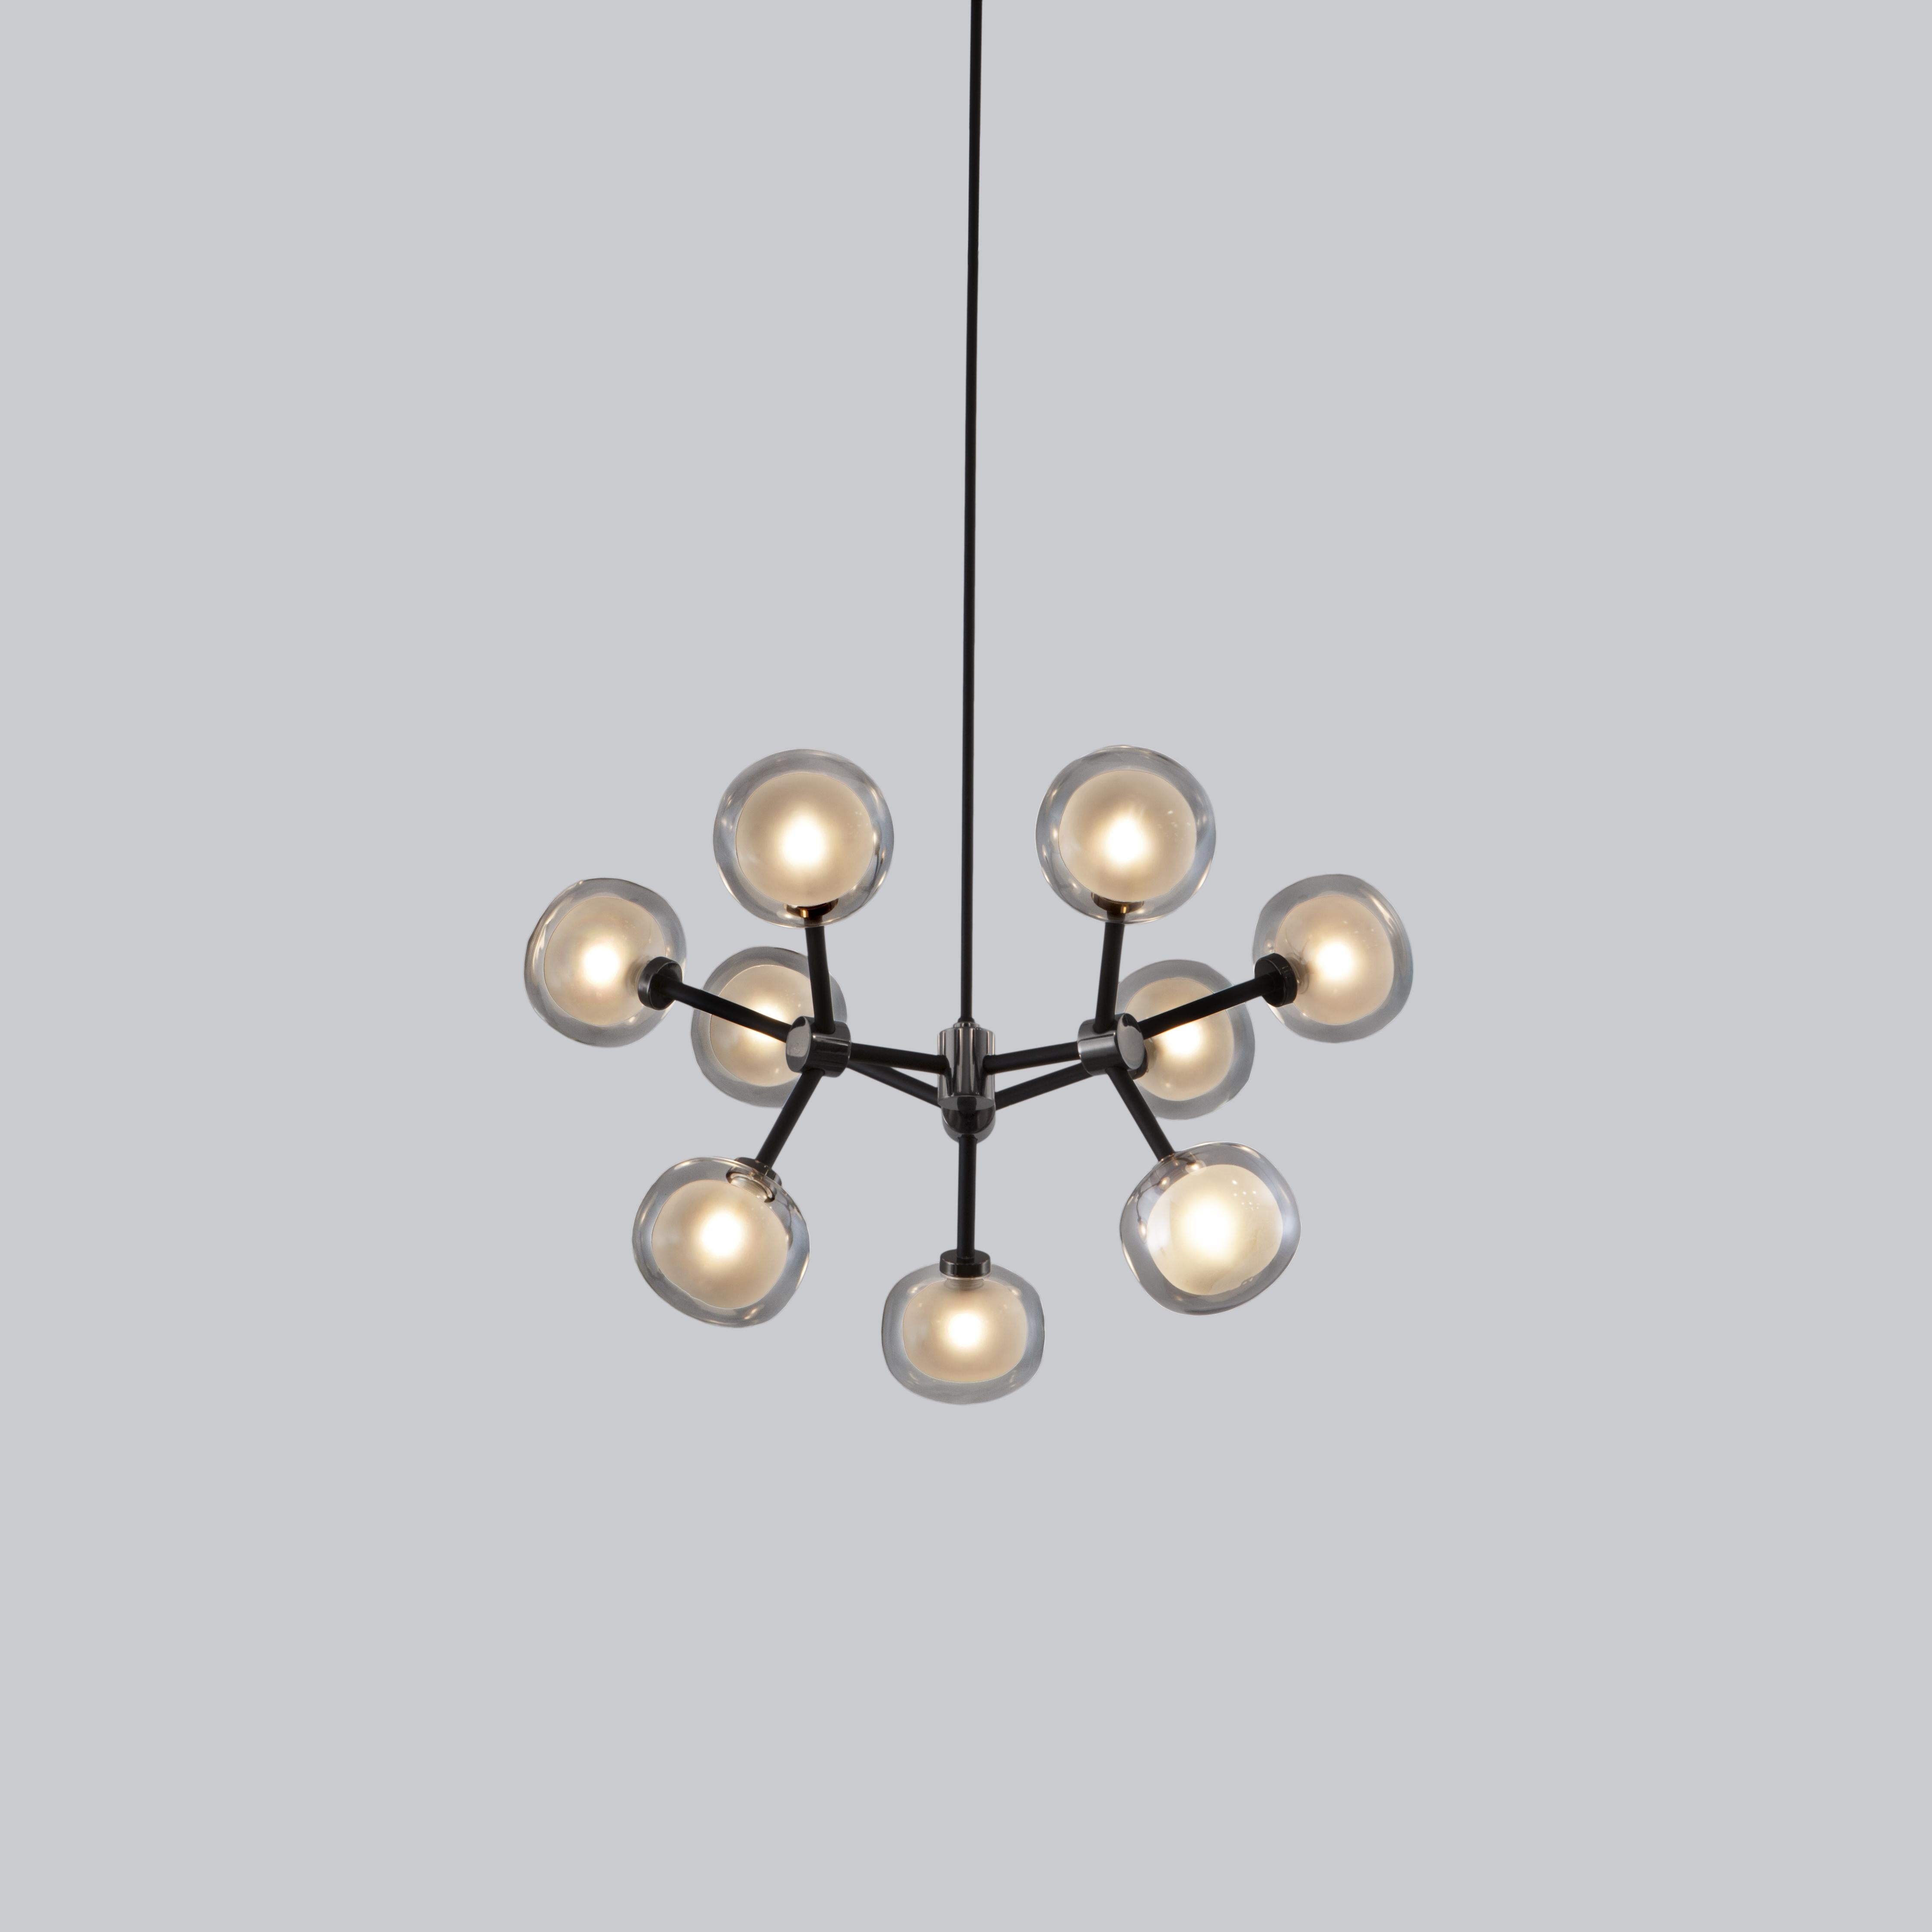 Chandelier Nabila 552.10 by Corrado Dotti x TOOY
9 lights
UL Listed 

Model shown:
Finish: Brushed brass
Color: Clear glass
Canopy: Ø 13 cm

Bulb compliance : 12 x G9 220/240V 3W Compliant with USA electric system

Pendant: Cable length 30/ 60 / 90